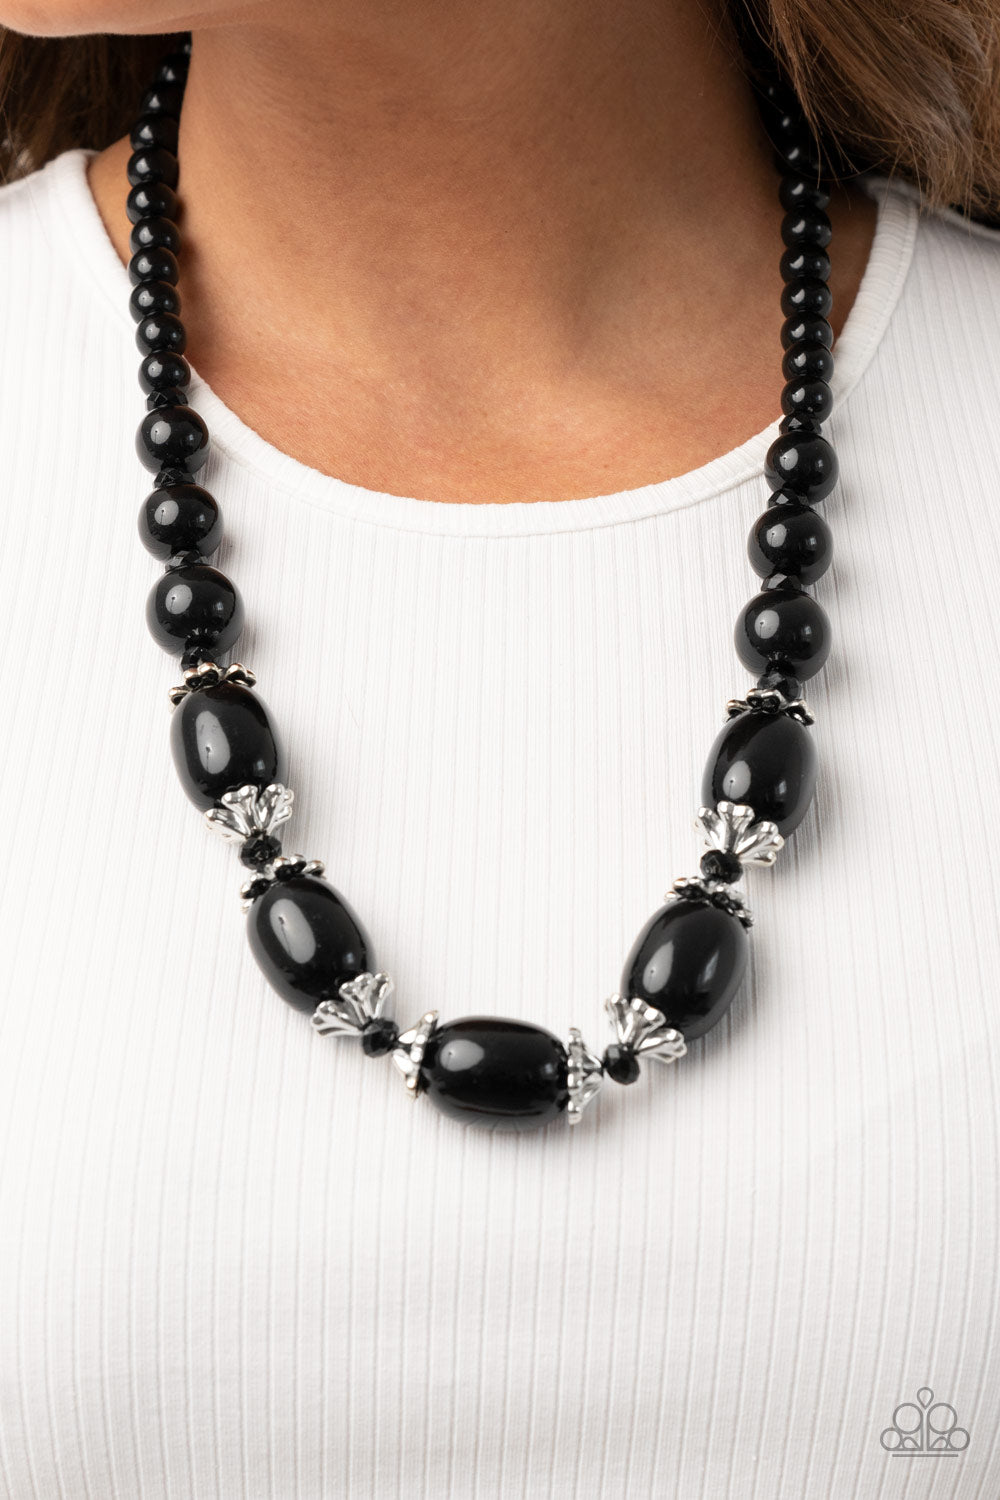 Paparazzi Accessories After Party Posh - Black Necklaces infused with decorative silver fittings and black crystal-like beads, oversized black beads boldly link below the collar for a glamorous pop of color. Features an adjustable clasp closure.  Sold as one individual necklace. Includes one pair of matching earrings.